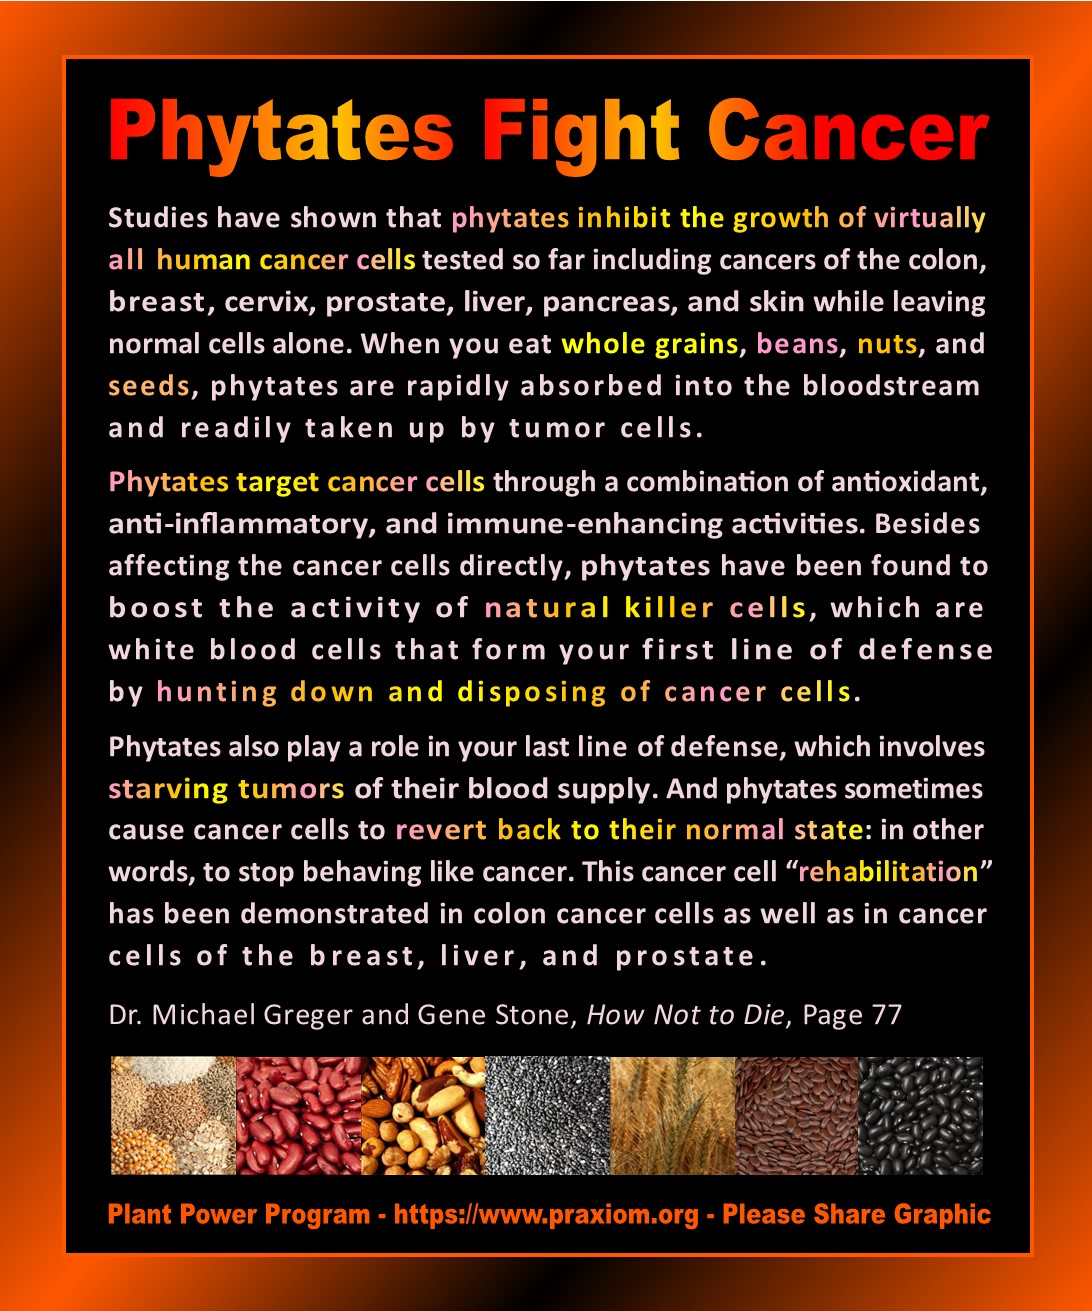 Phytates Fight Cancer - Dr. Michael Greger